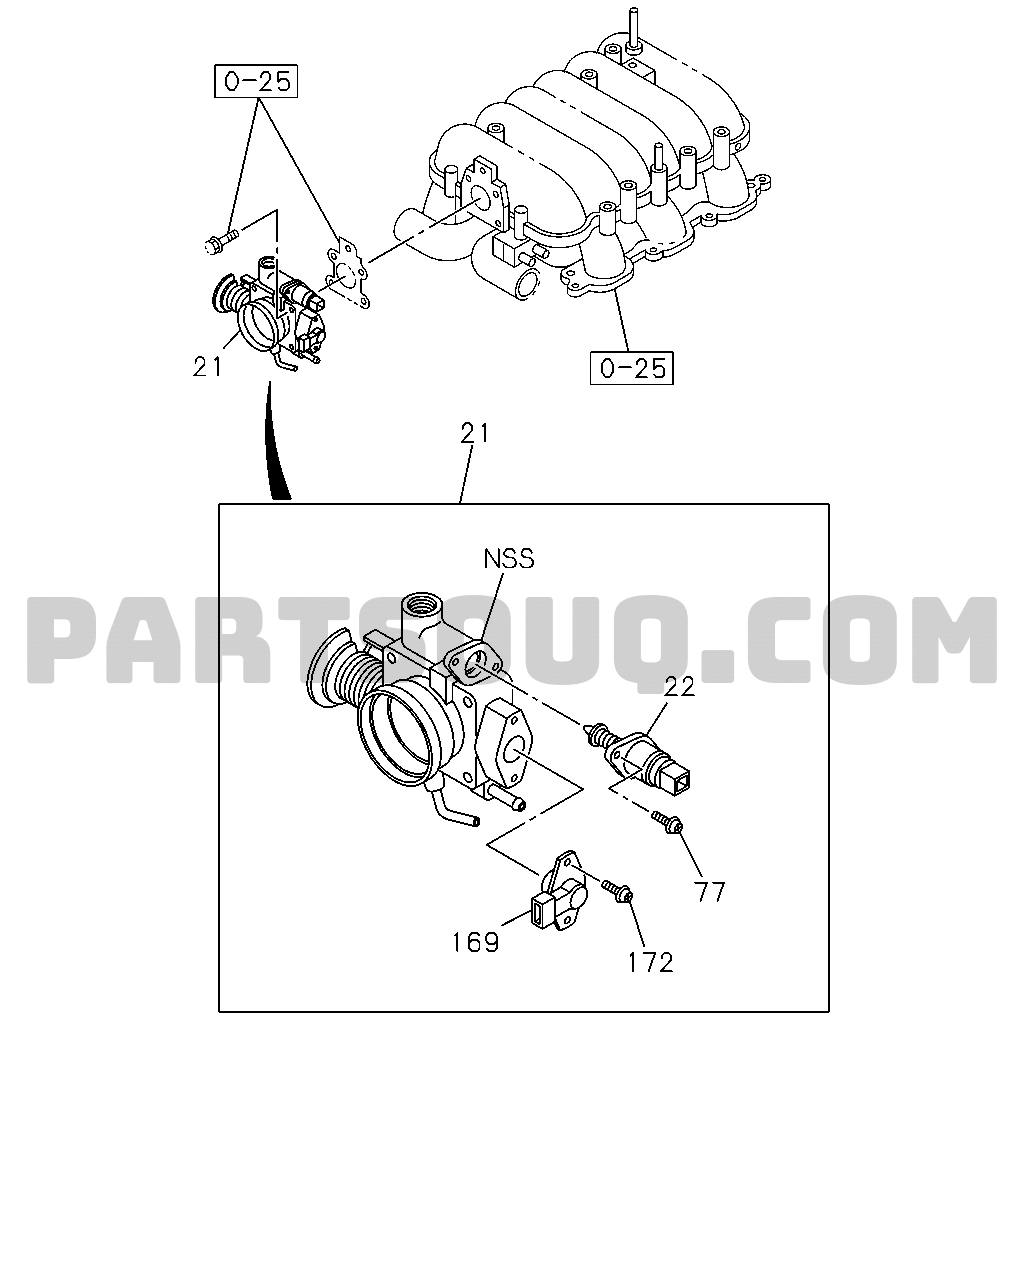 ISUZU TFR/TFS-LHD PICKUP 0-35 - ENGINE CONTROL VALVE AND LEVER, 6VE1